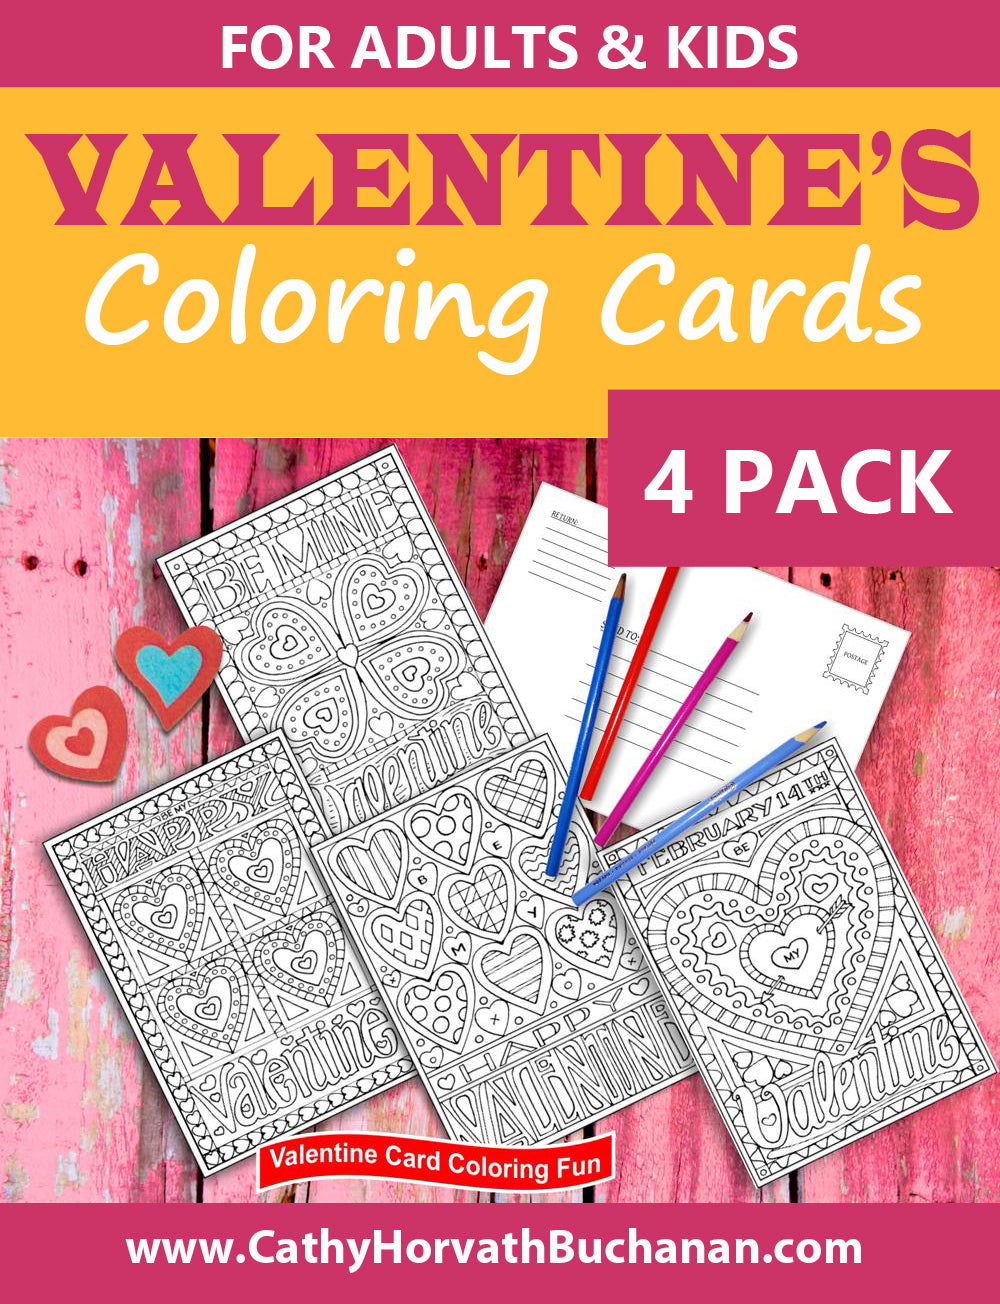 Valentine 4 pack Coloring Card Kit + Envelope, Instant Printable PDF by Cathy Horvath Buchanan